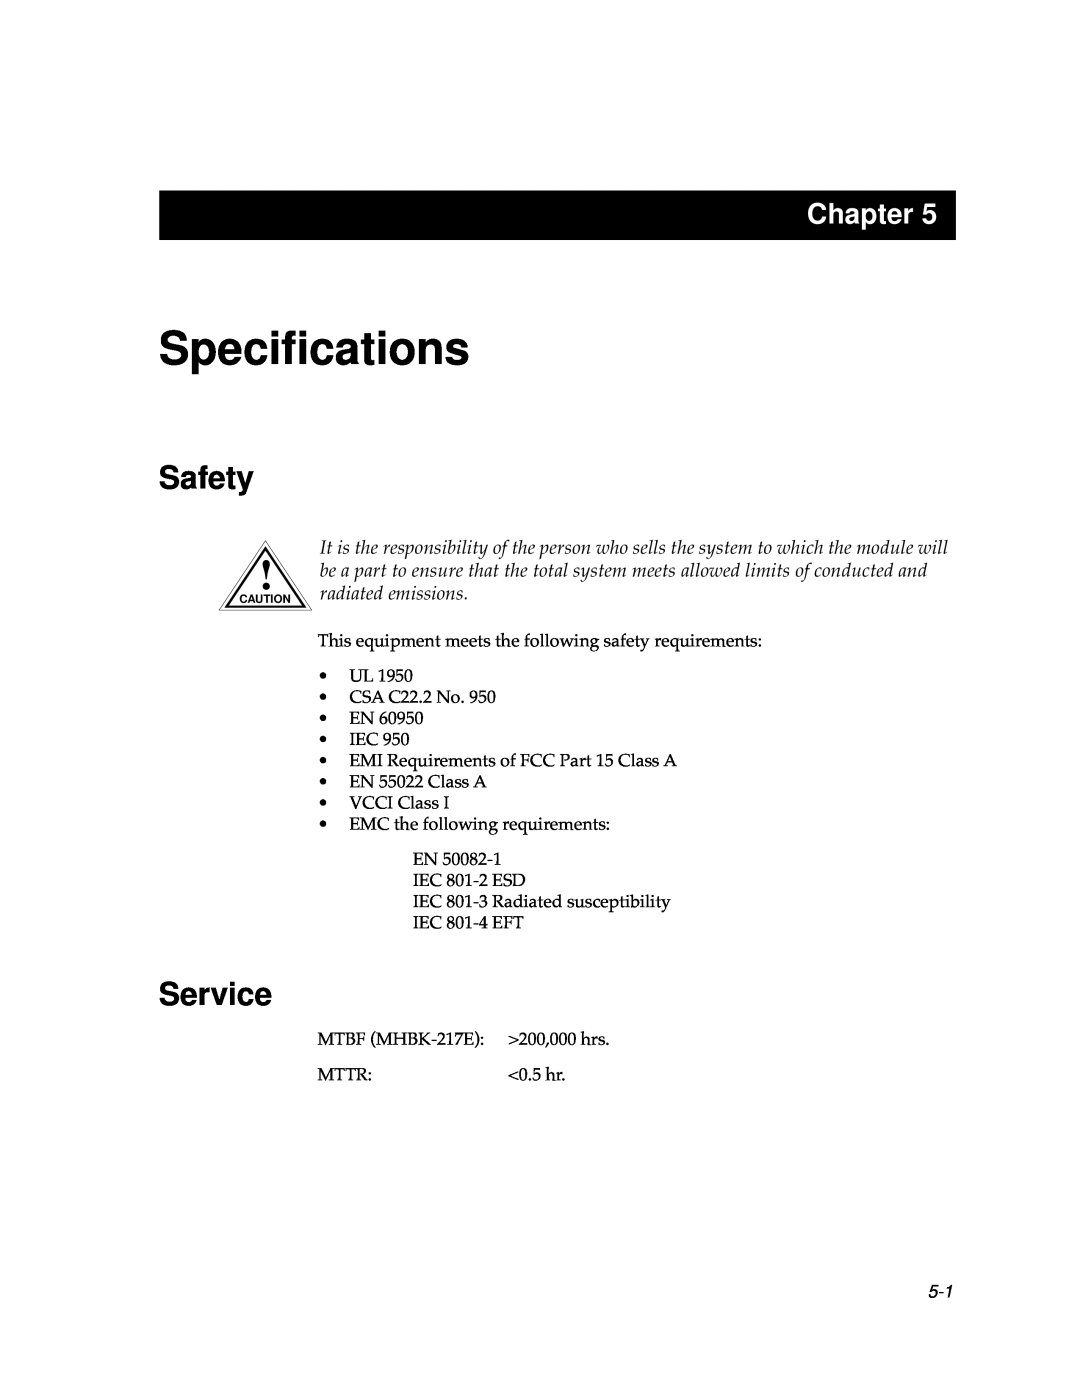 Cabletron Systems 9W111-08 manual Speciﬁcations, Safety, Service, Chapter 